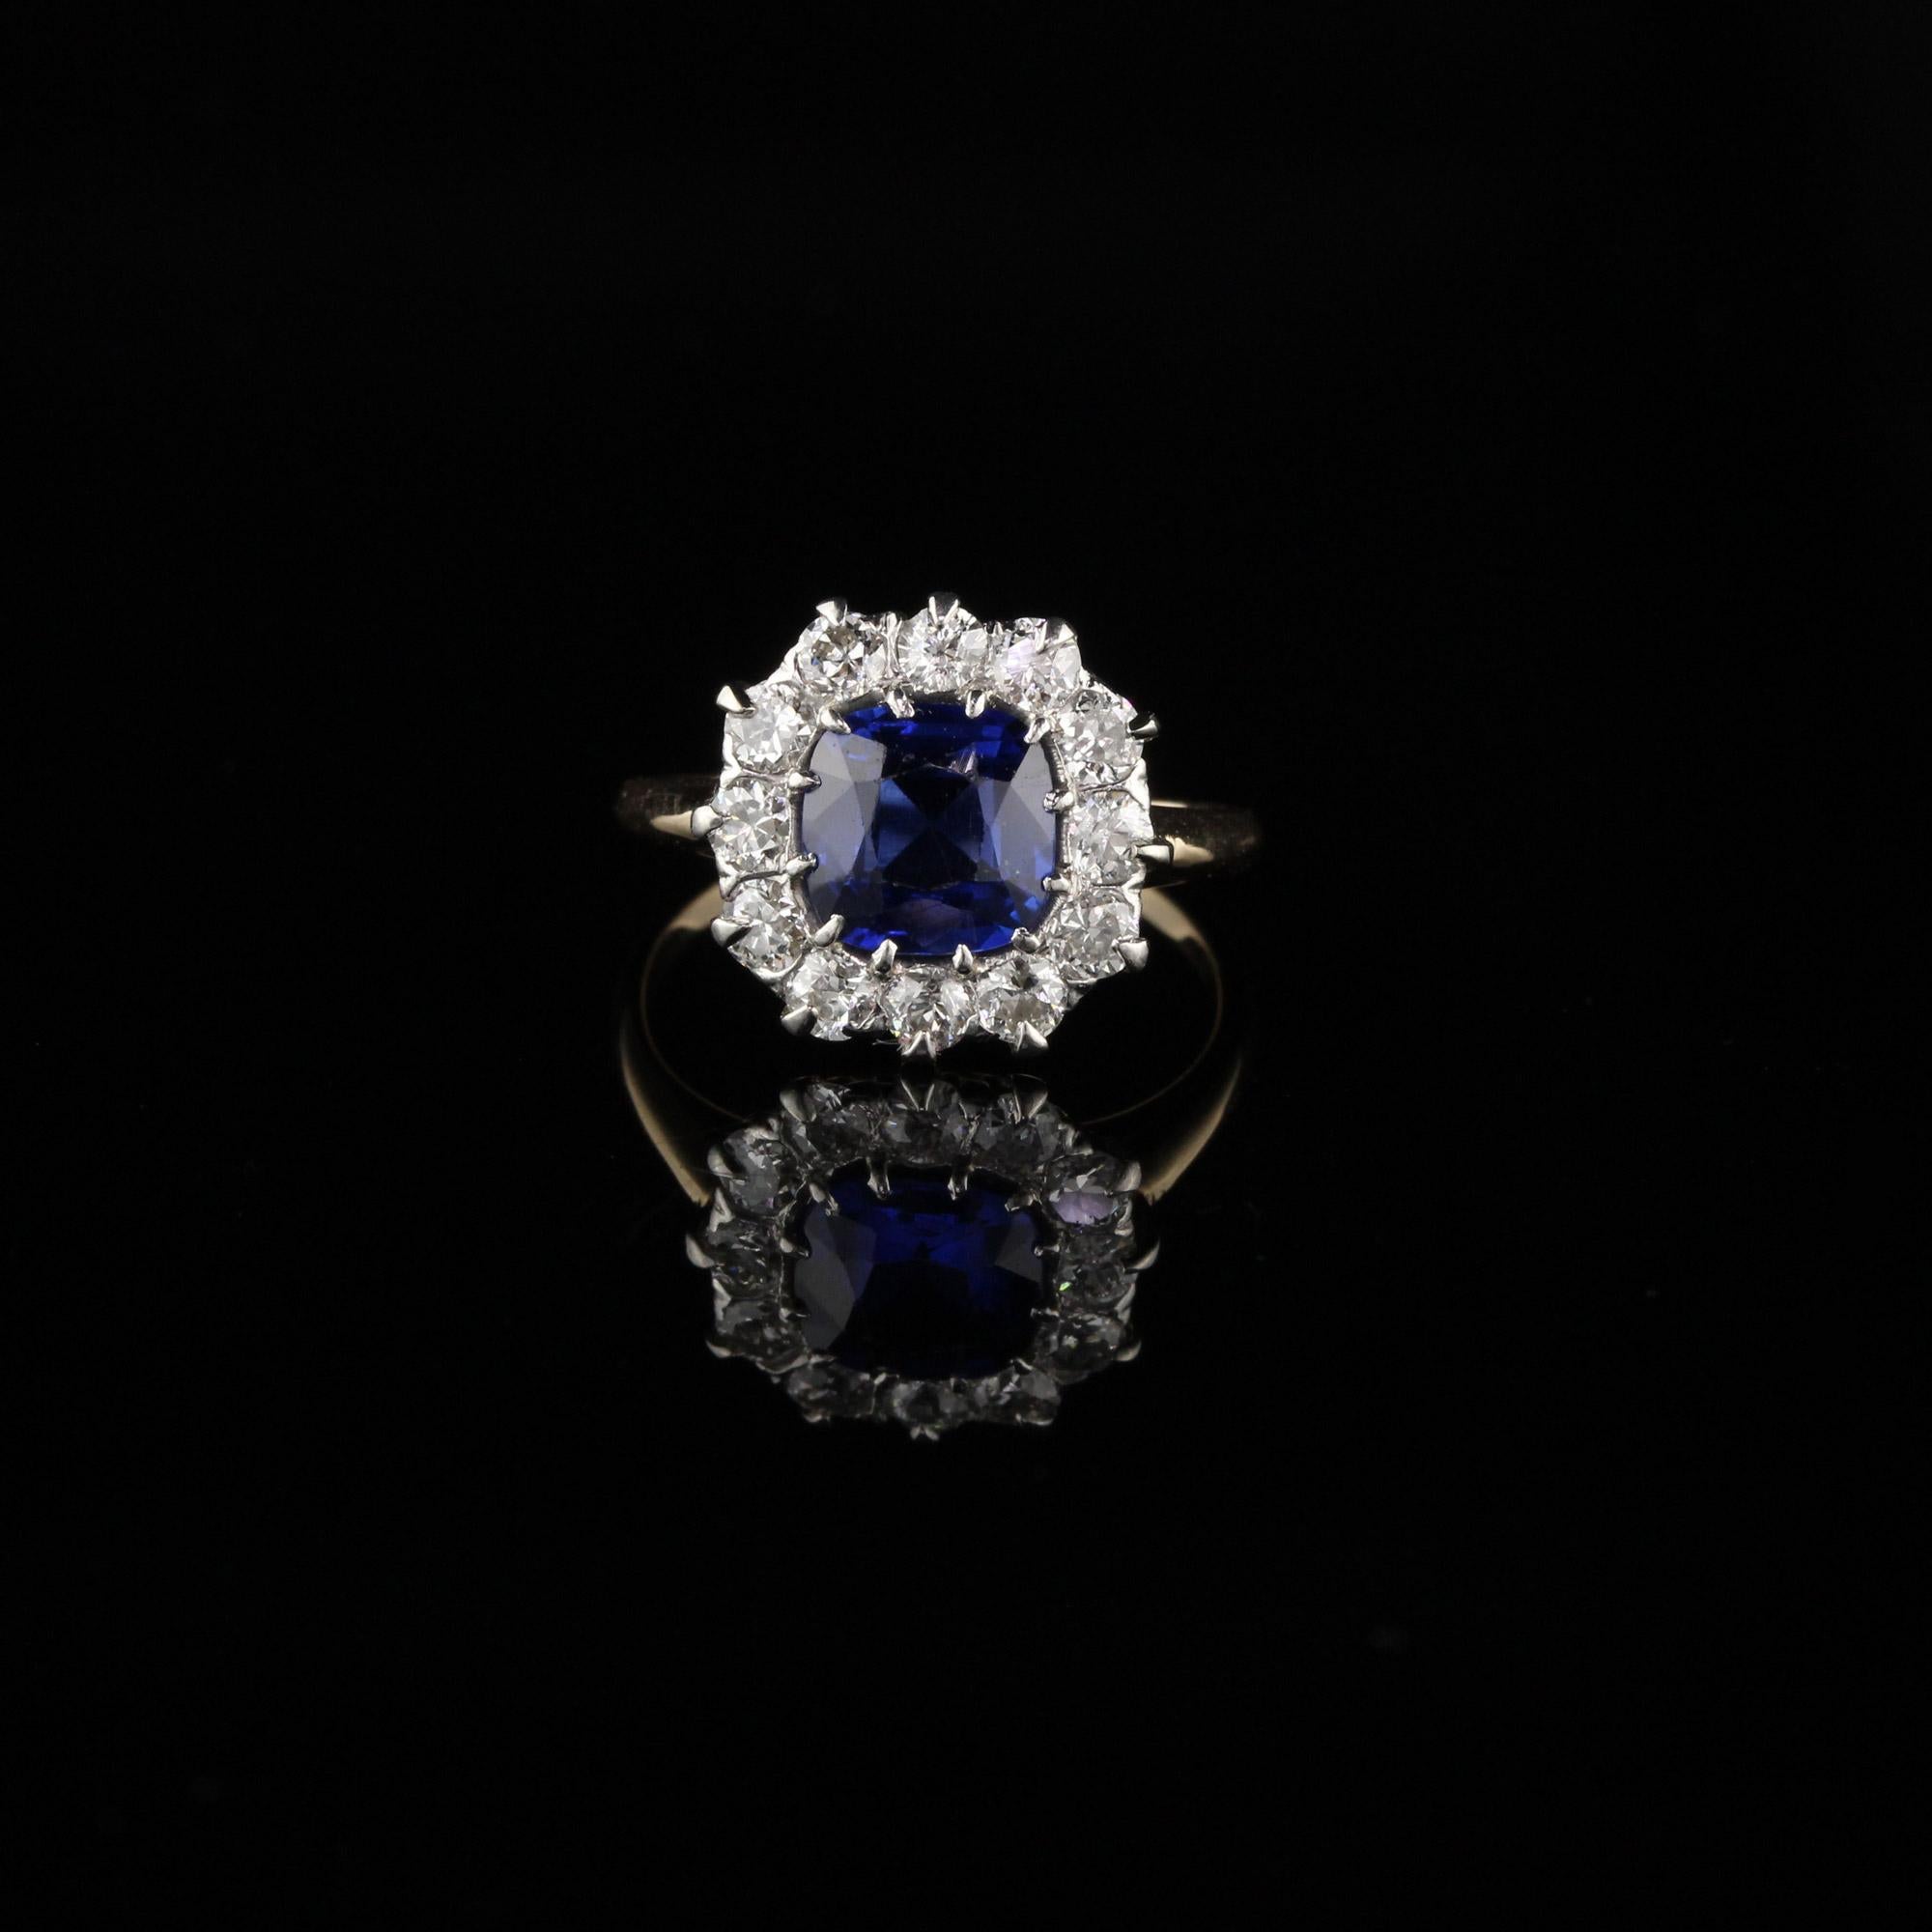 Old European Cut Antique Victorian 18K Yellow Gold Diamond and Sapphire Engagement Ring